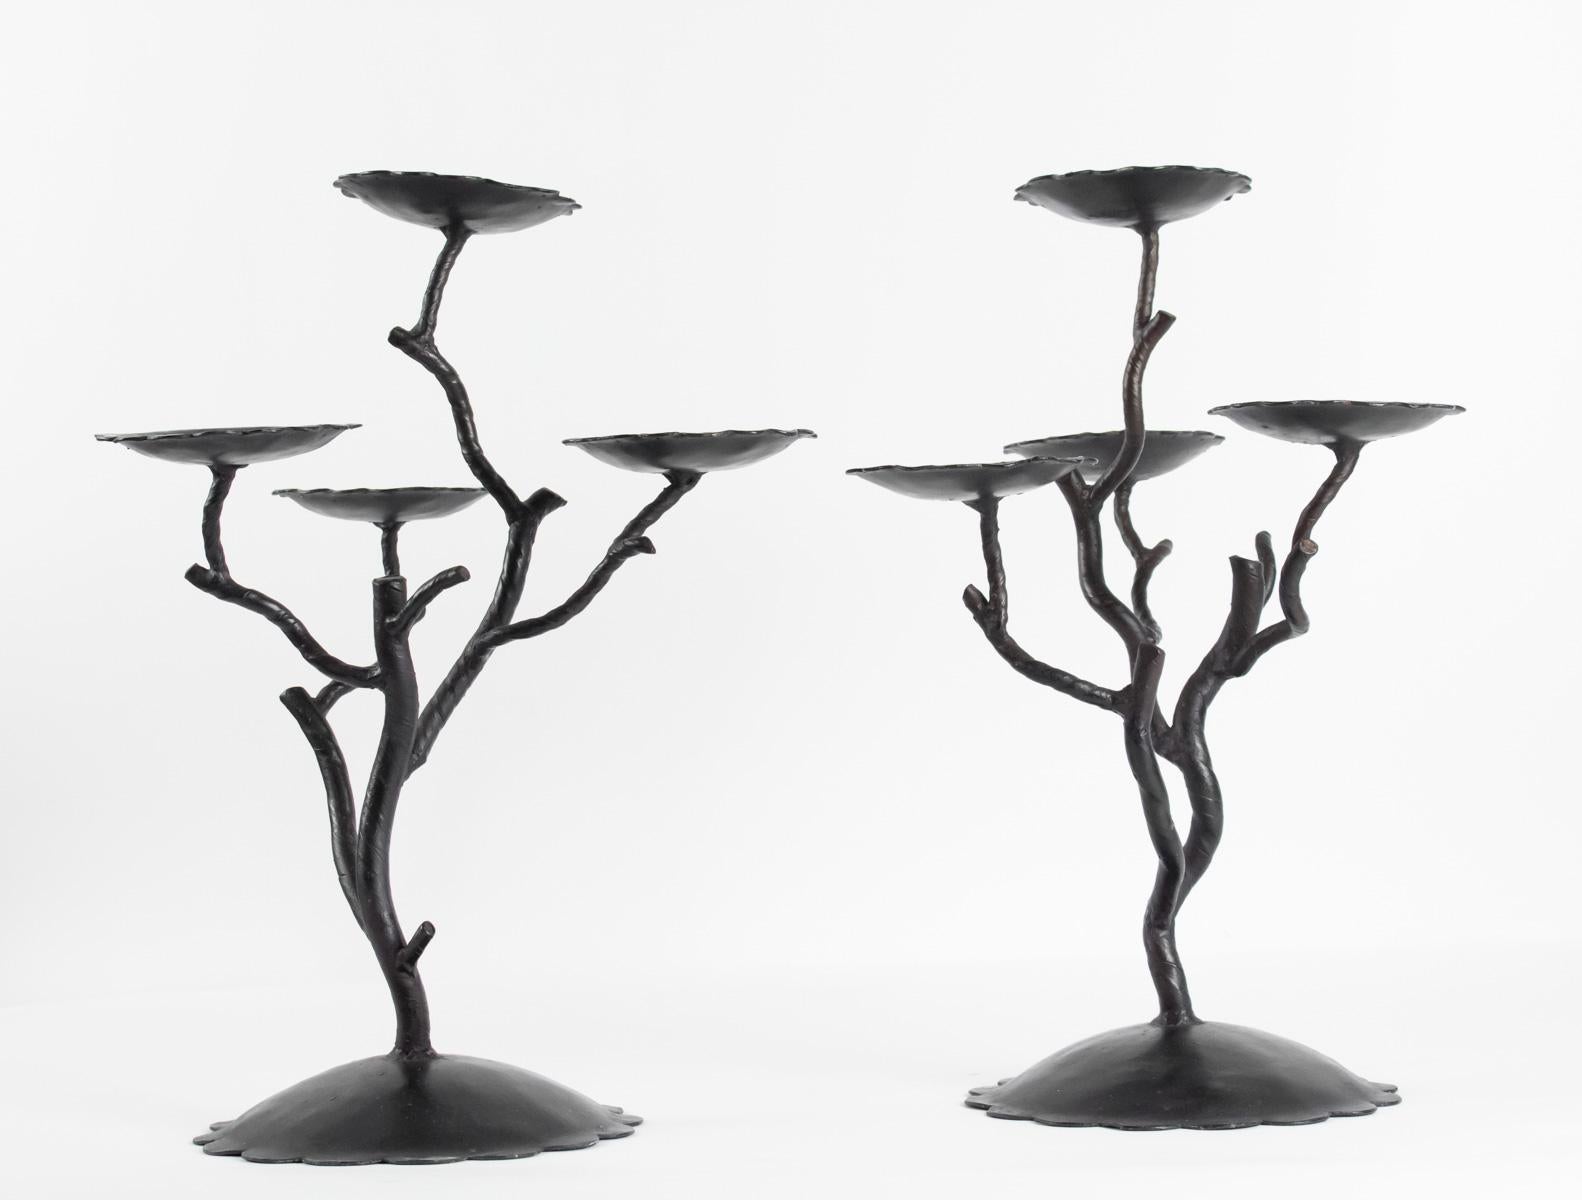 Pair of Candelabra 4 Branches, 20th Century, Modern Art For Sale 5